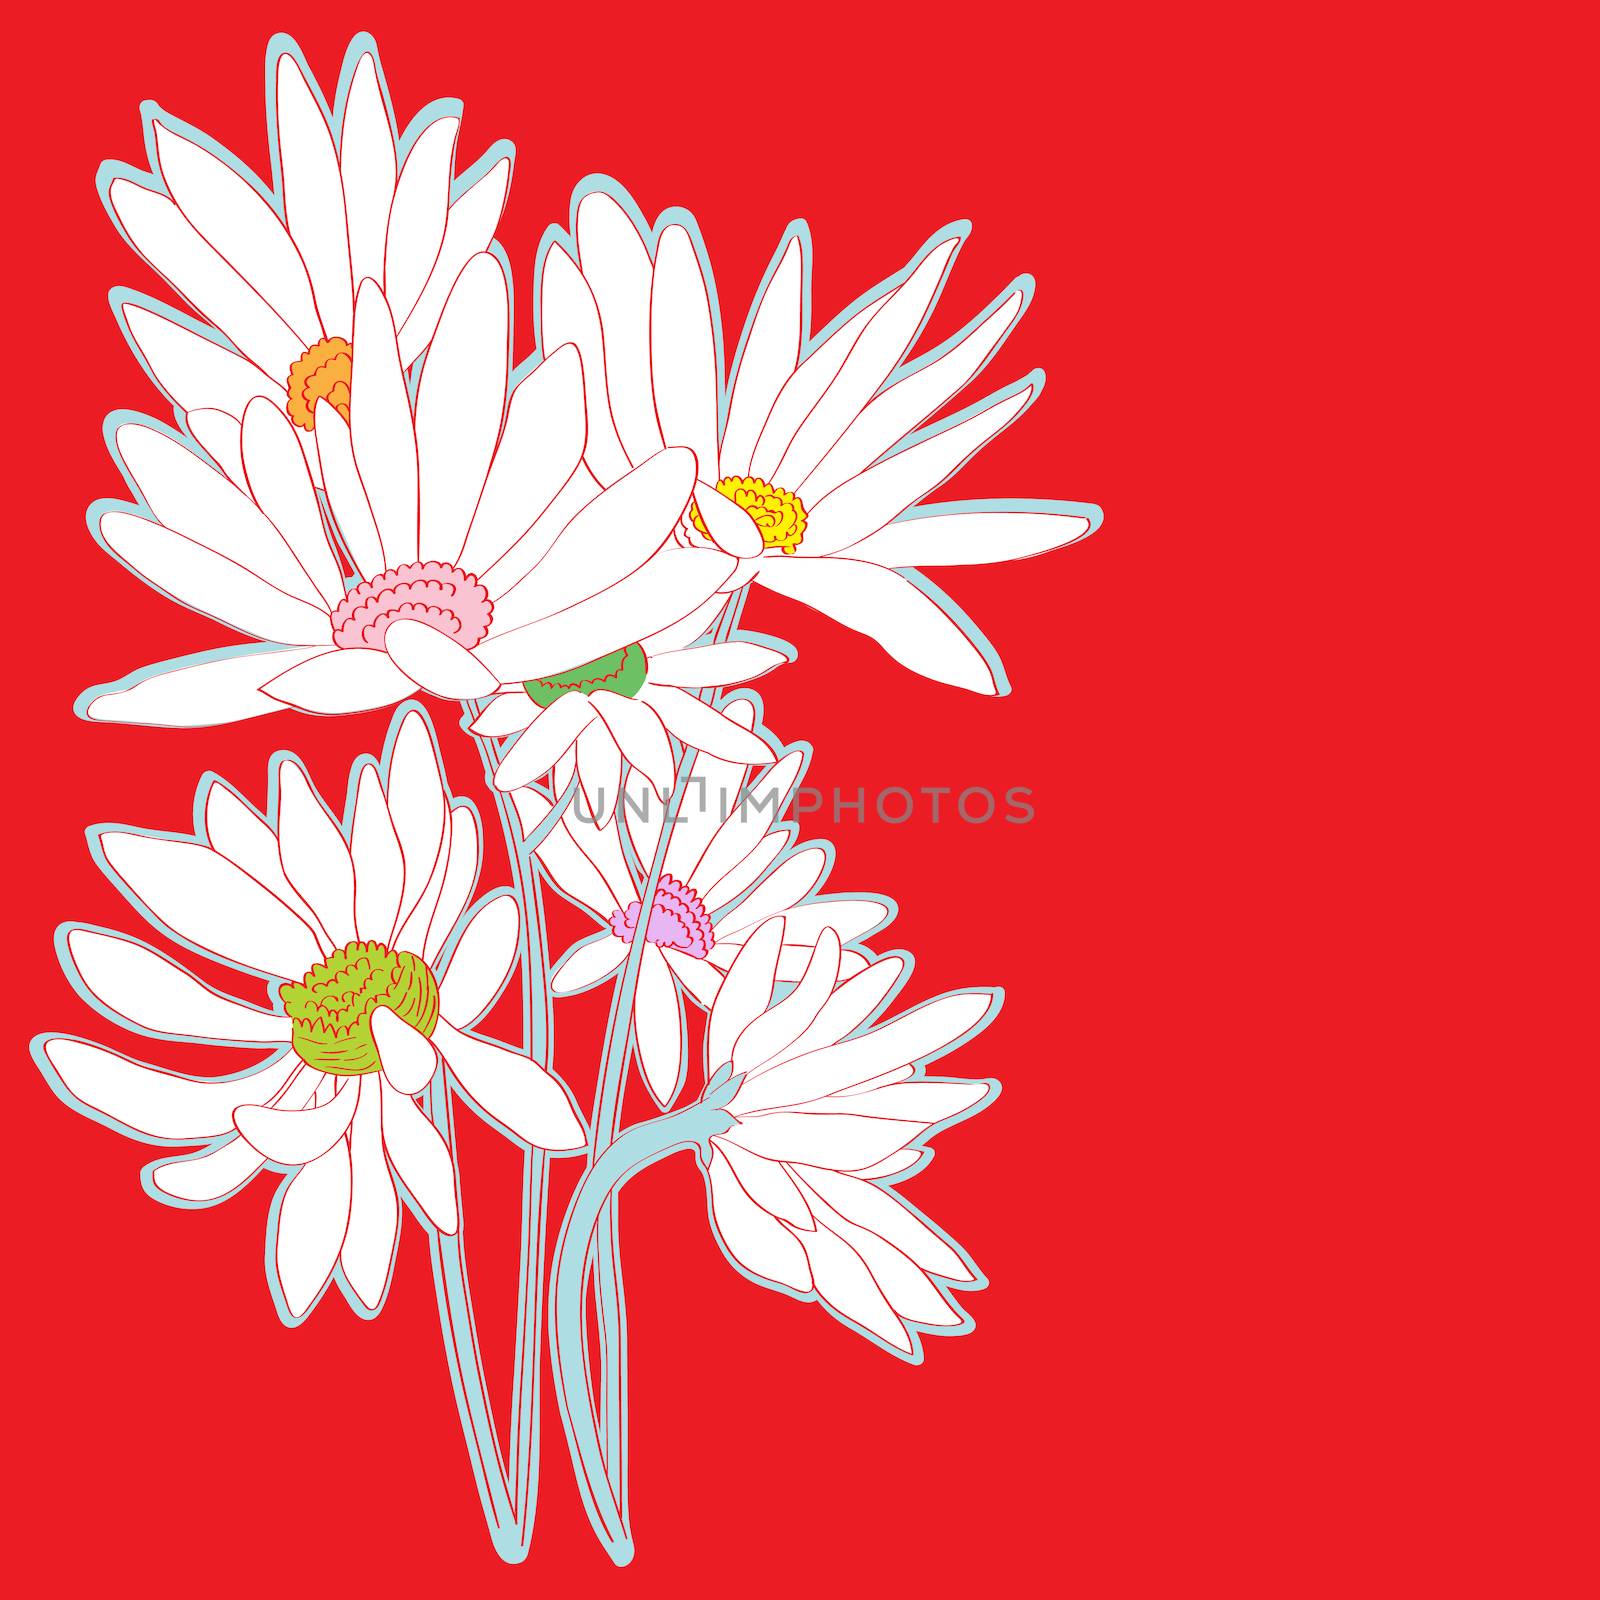 daisies red card by catacos